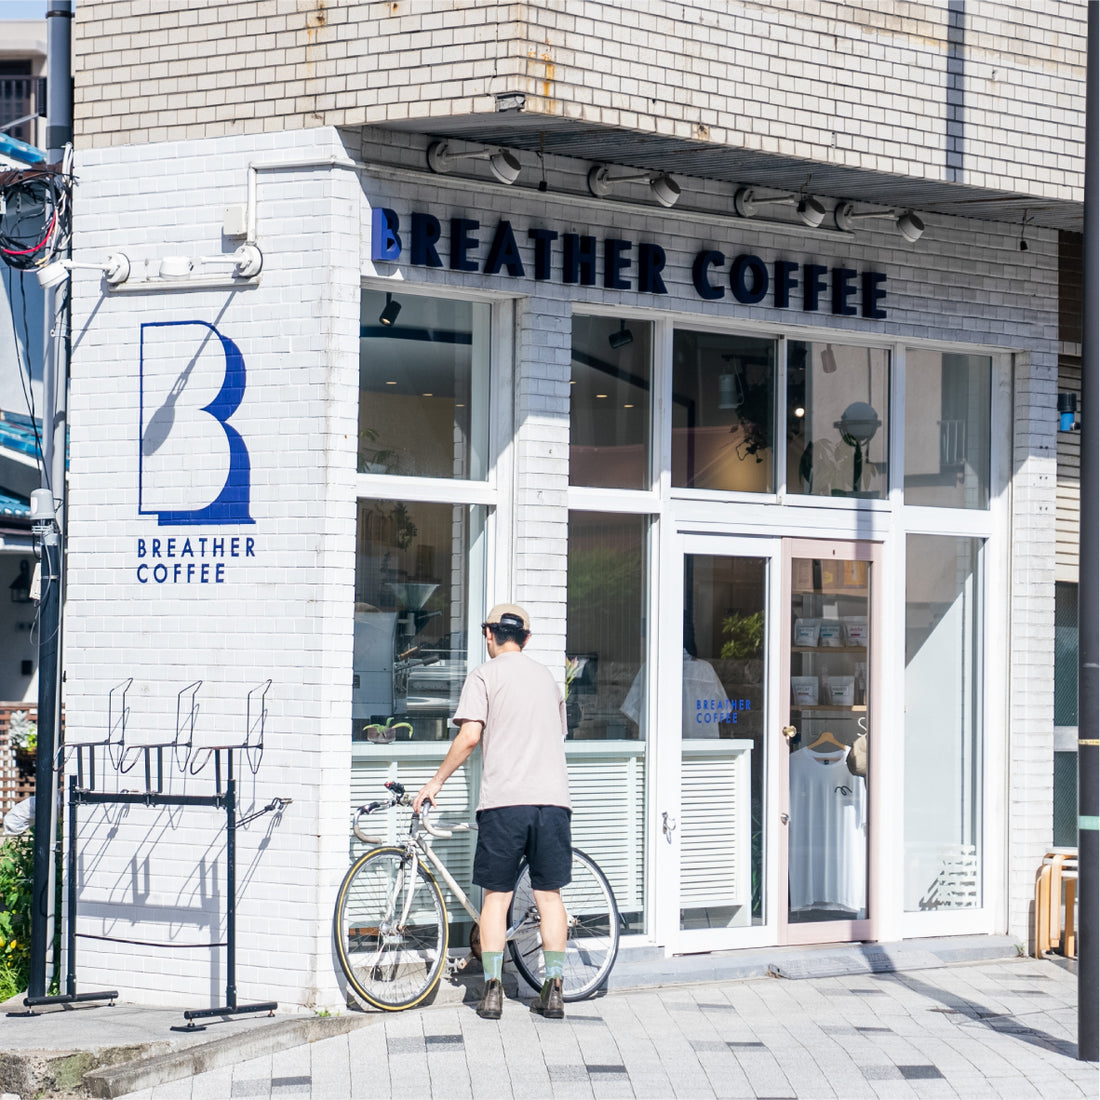 Breather Coffee